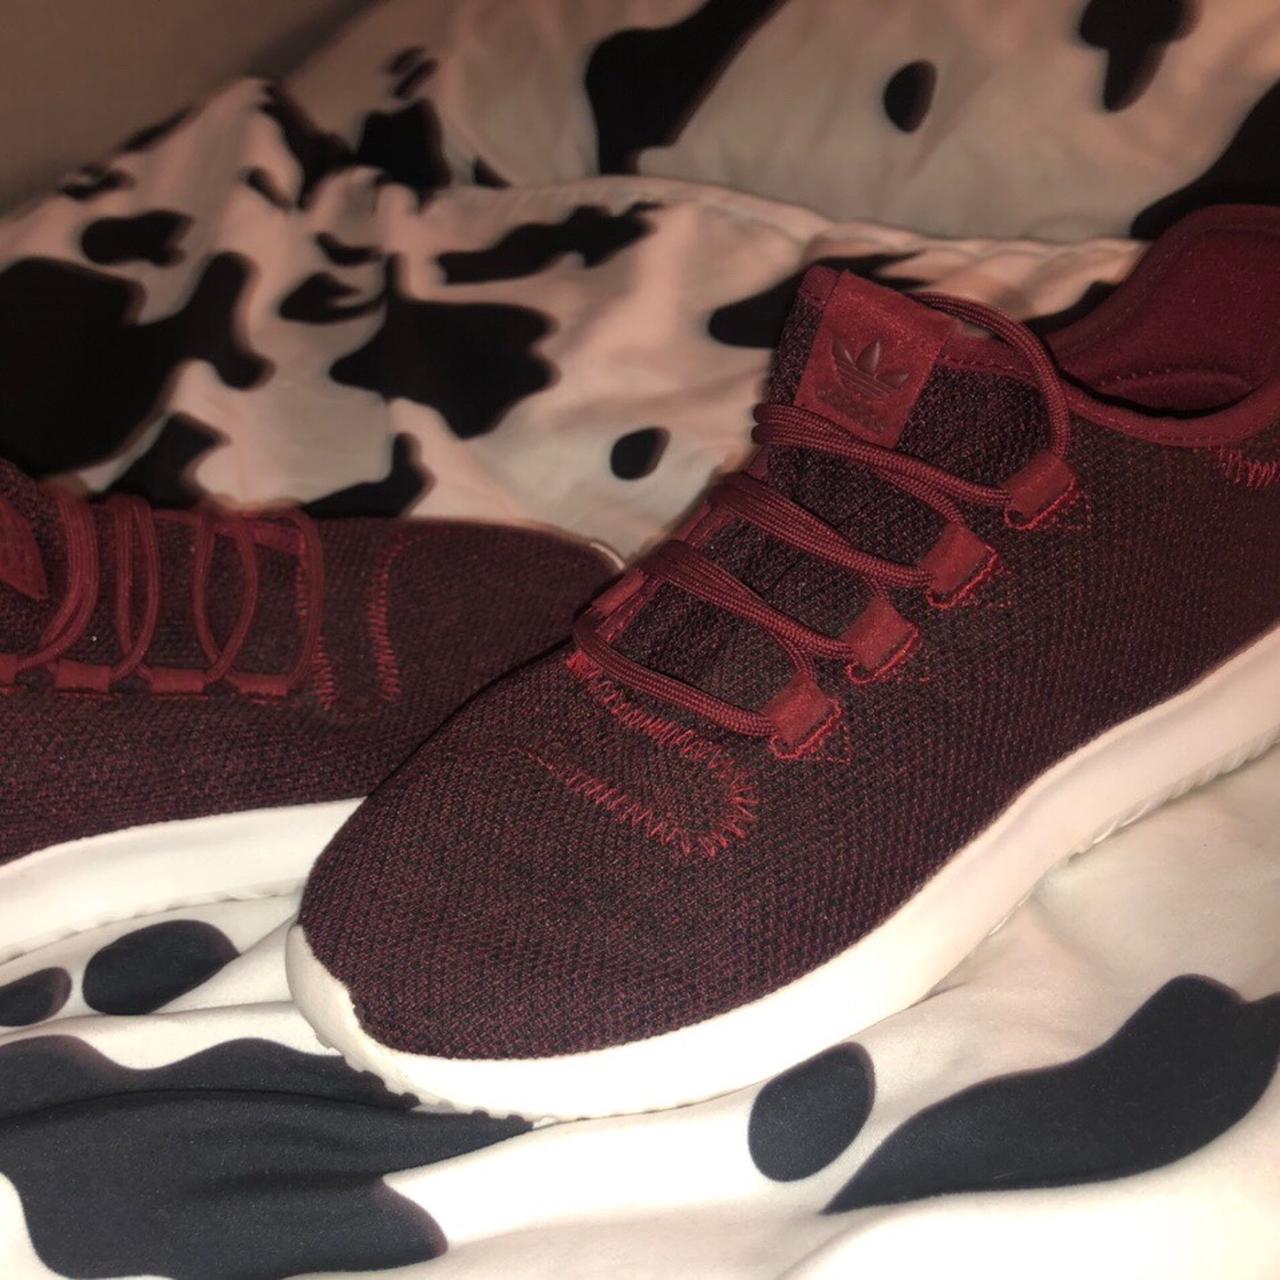 Adidas Women's Red and Burgundy Depop